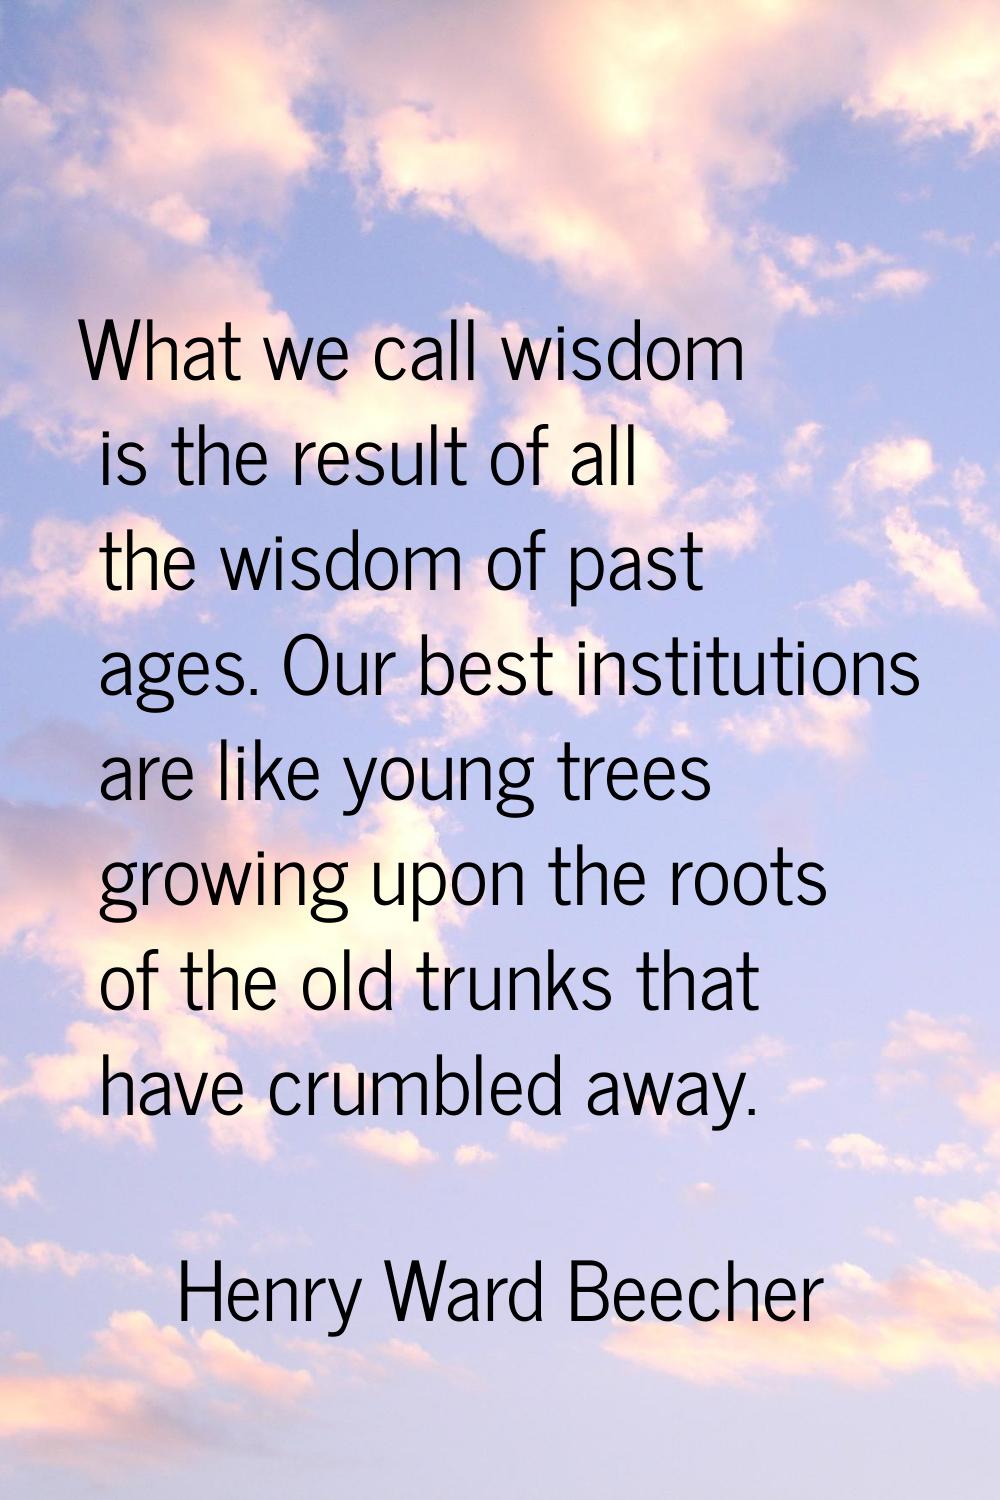 What we call wisdom is the result of all the wisdom of past ages. Our best institutions are like yo